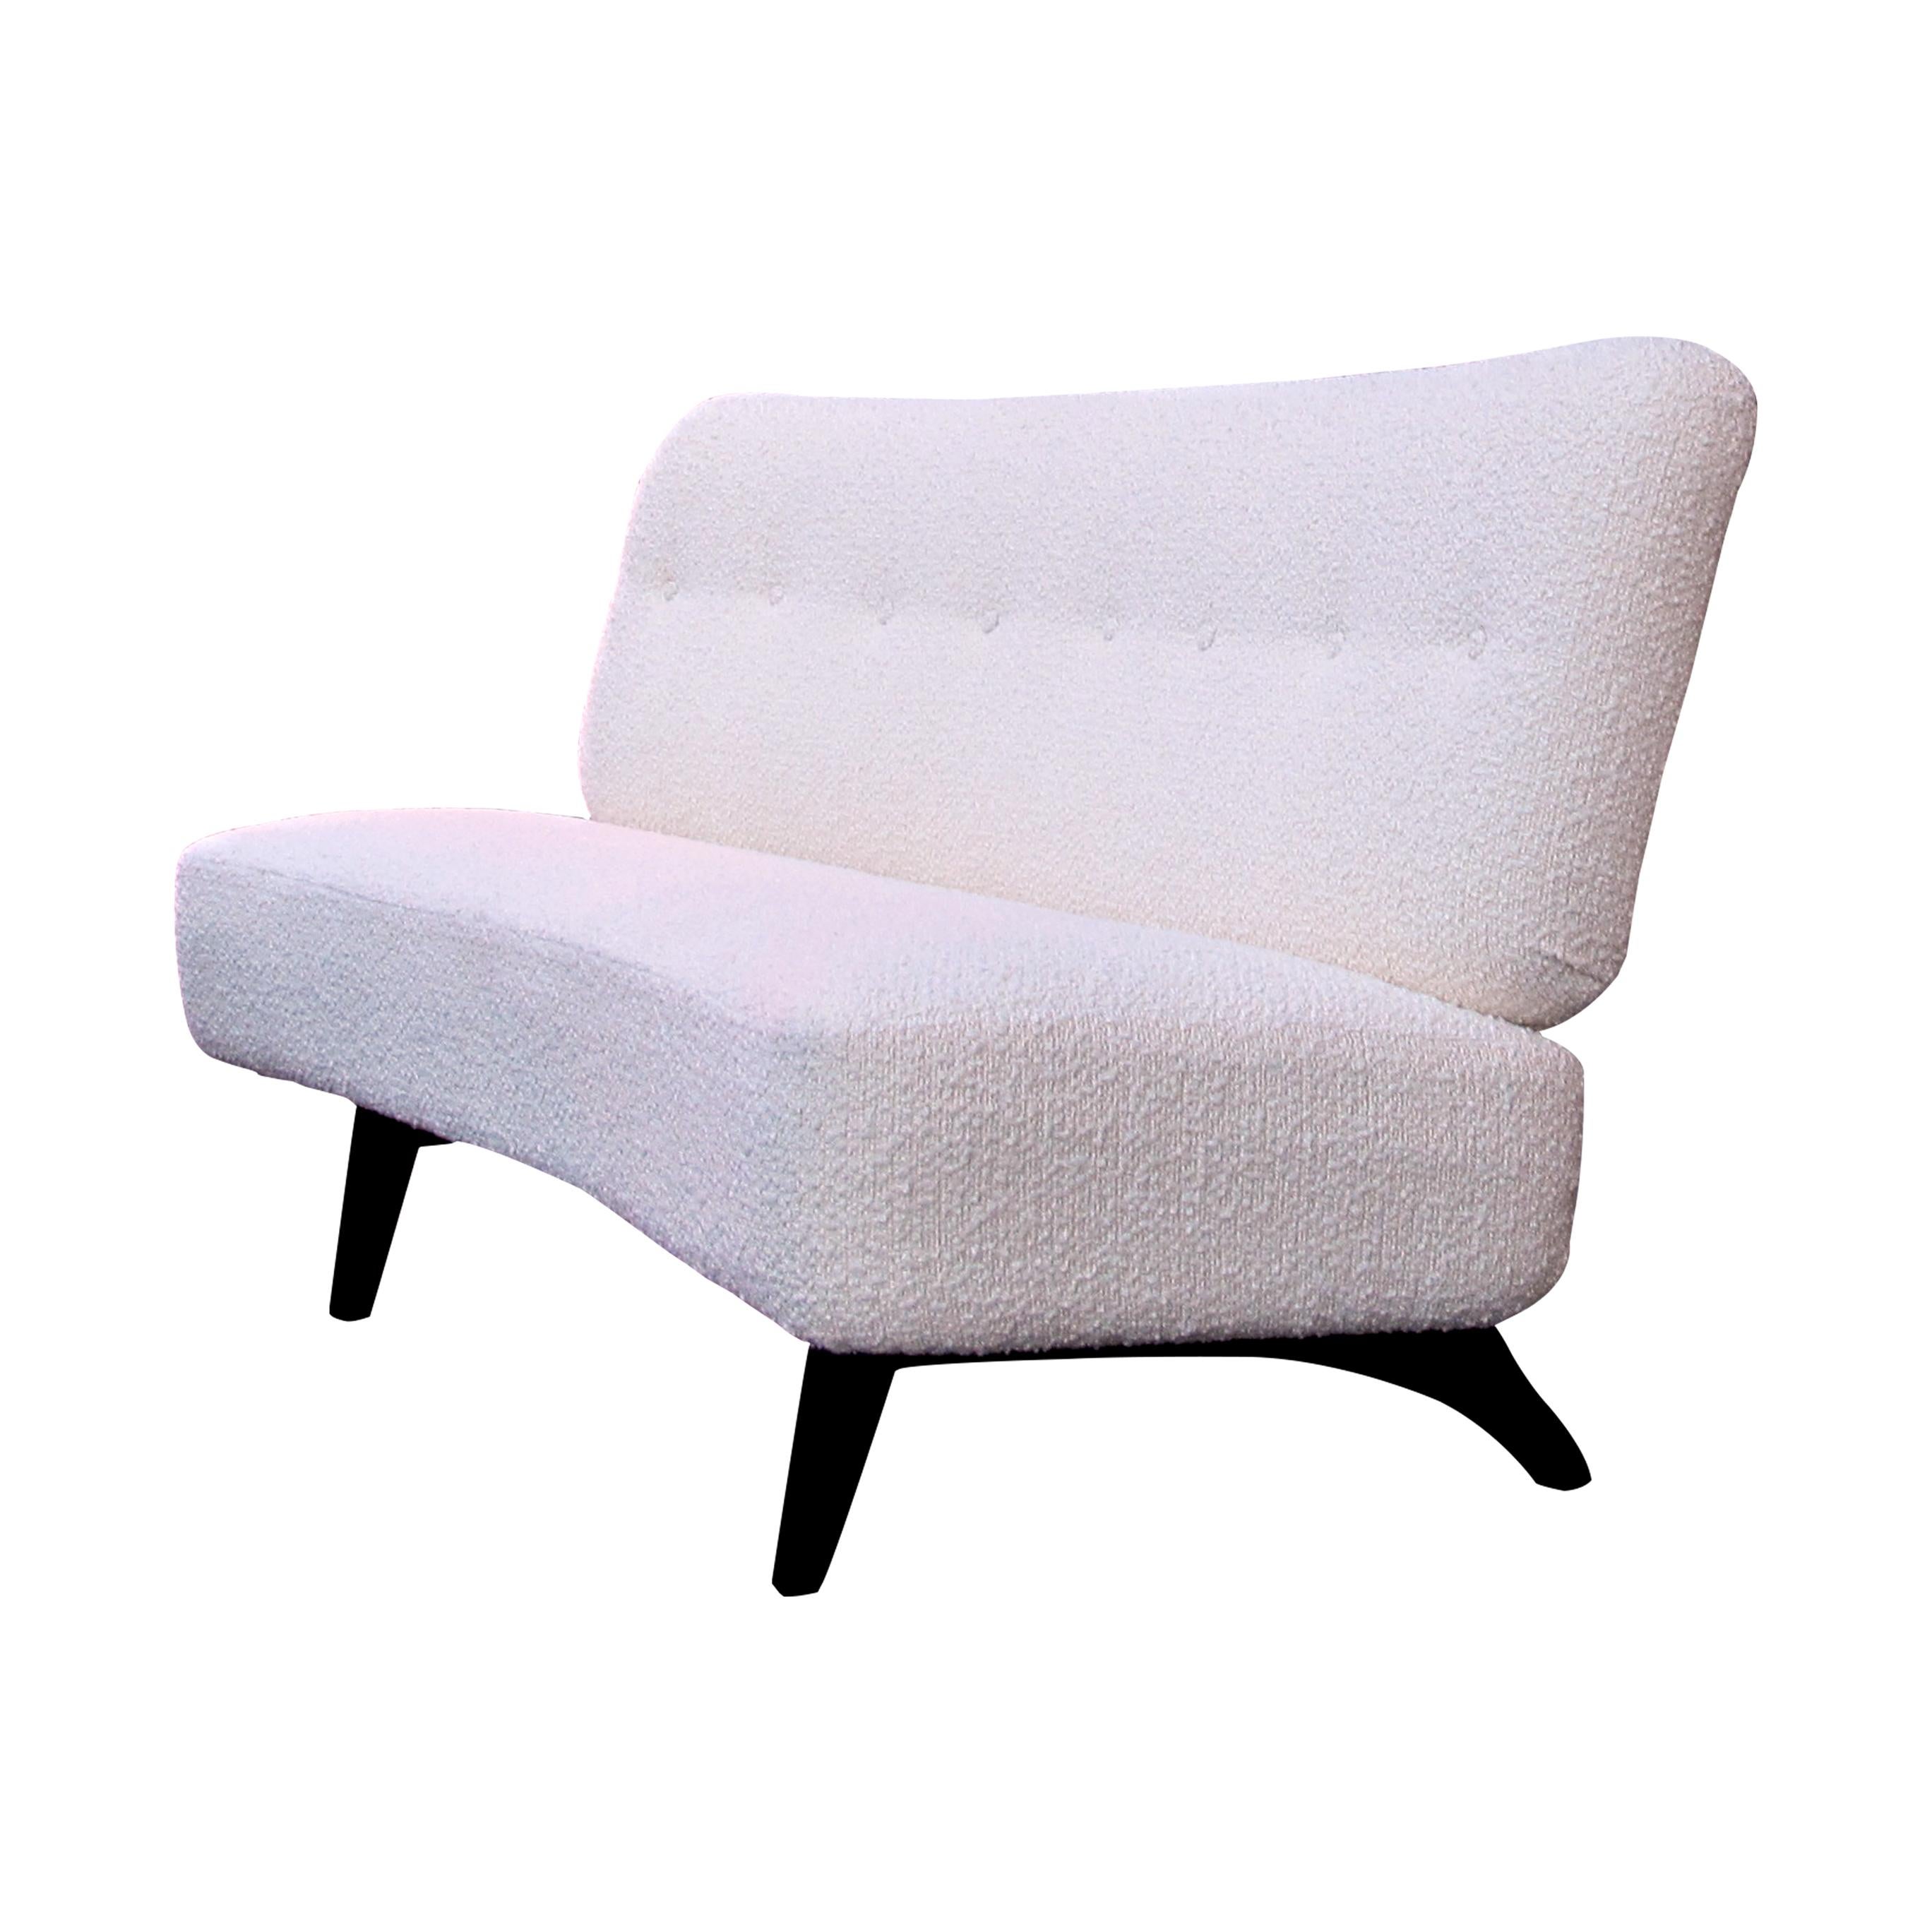 Fabric 1950s Finnish Three-Seater Sofa Model “Susanna” by Oiva Parviainen For Sale